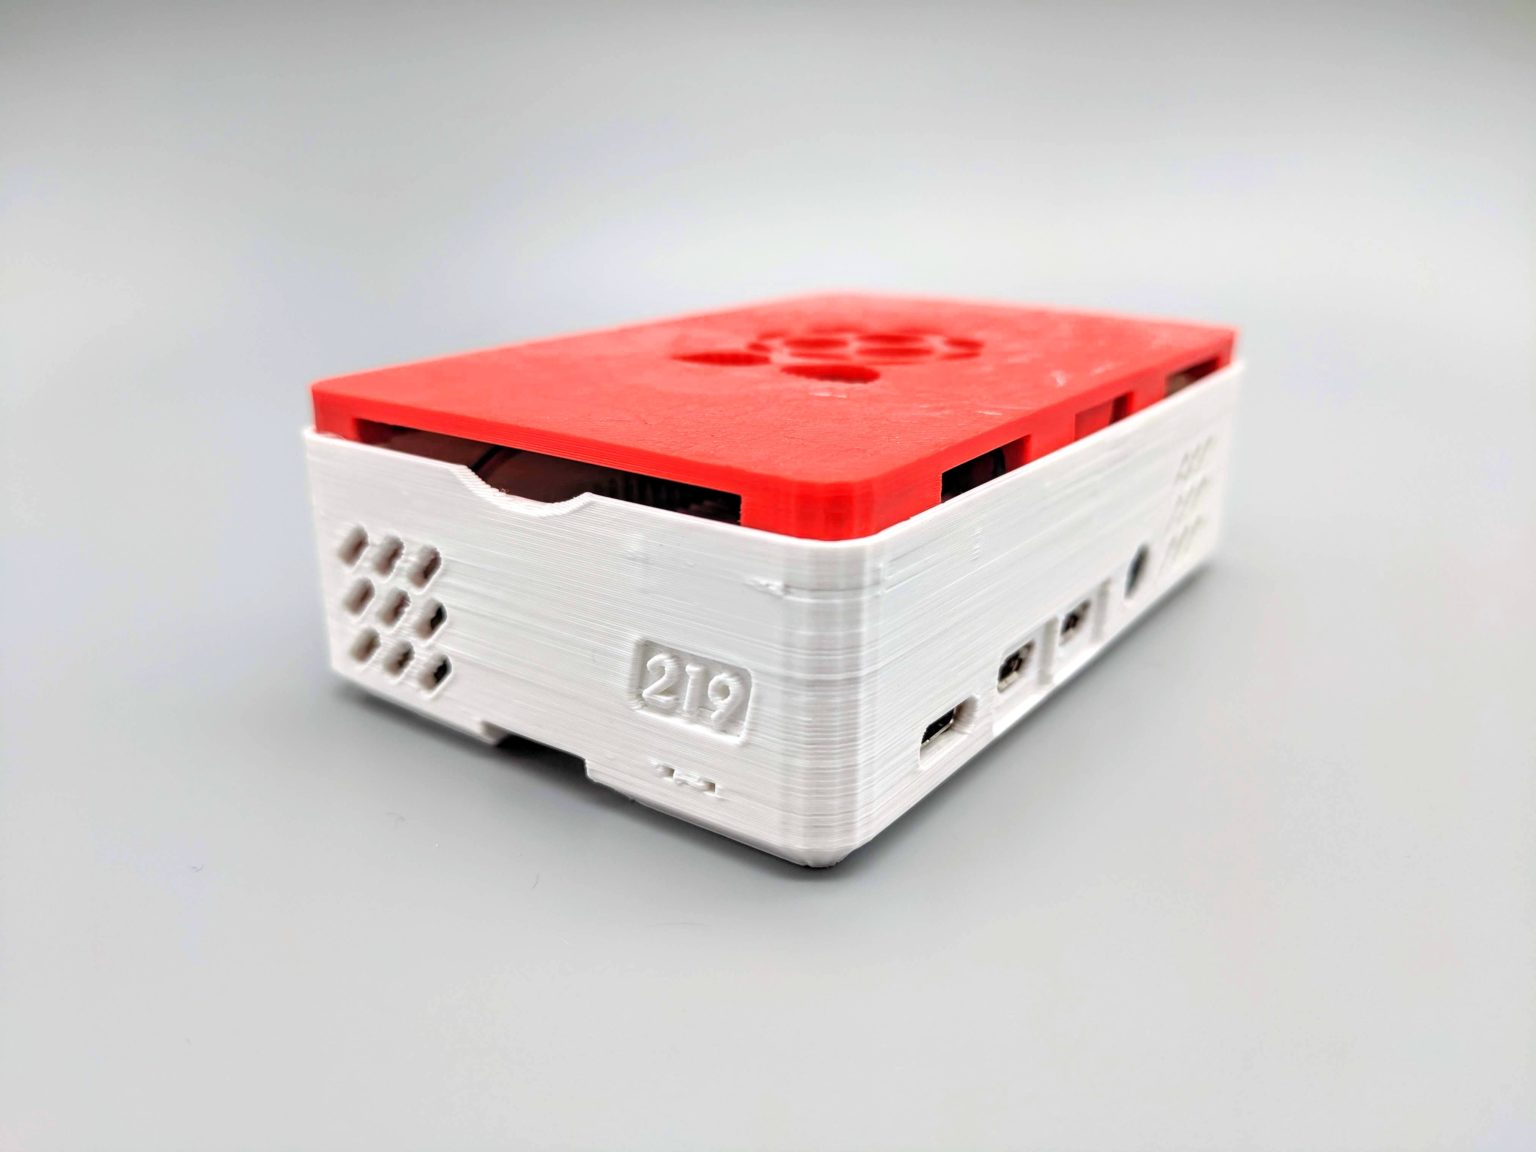 Raspberry Pi 3D Printed Case to Cool from 219 Design - IMG 20200114 165258 1 1536x1152